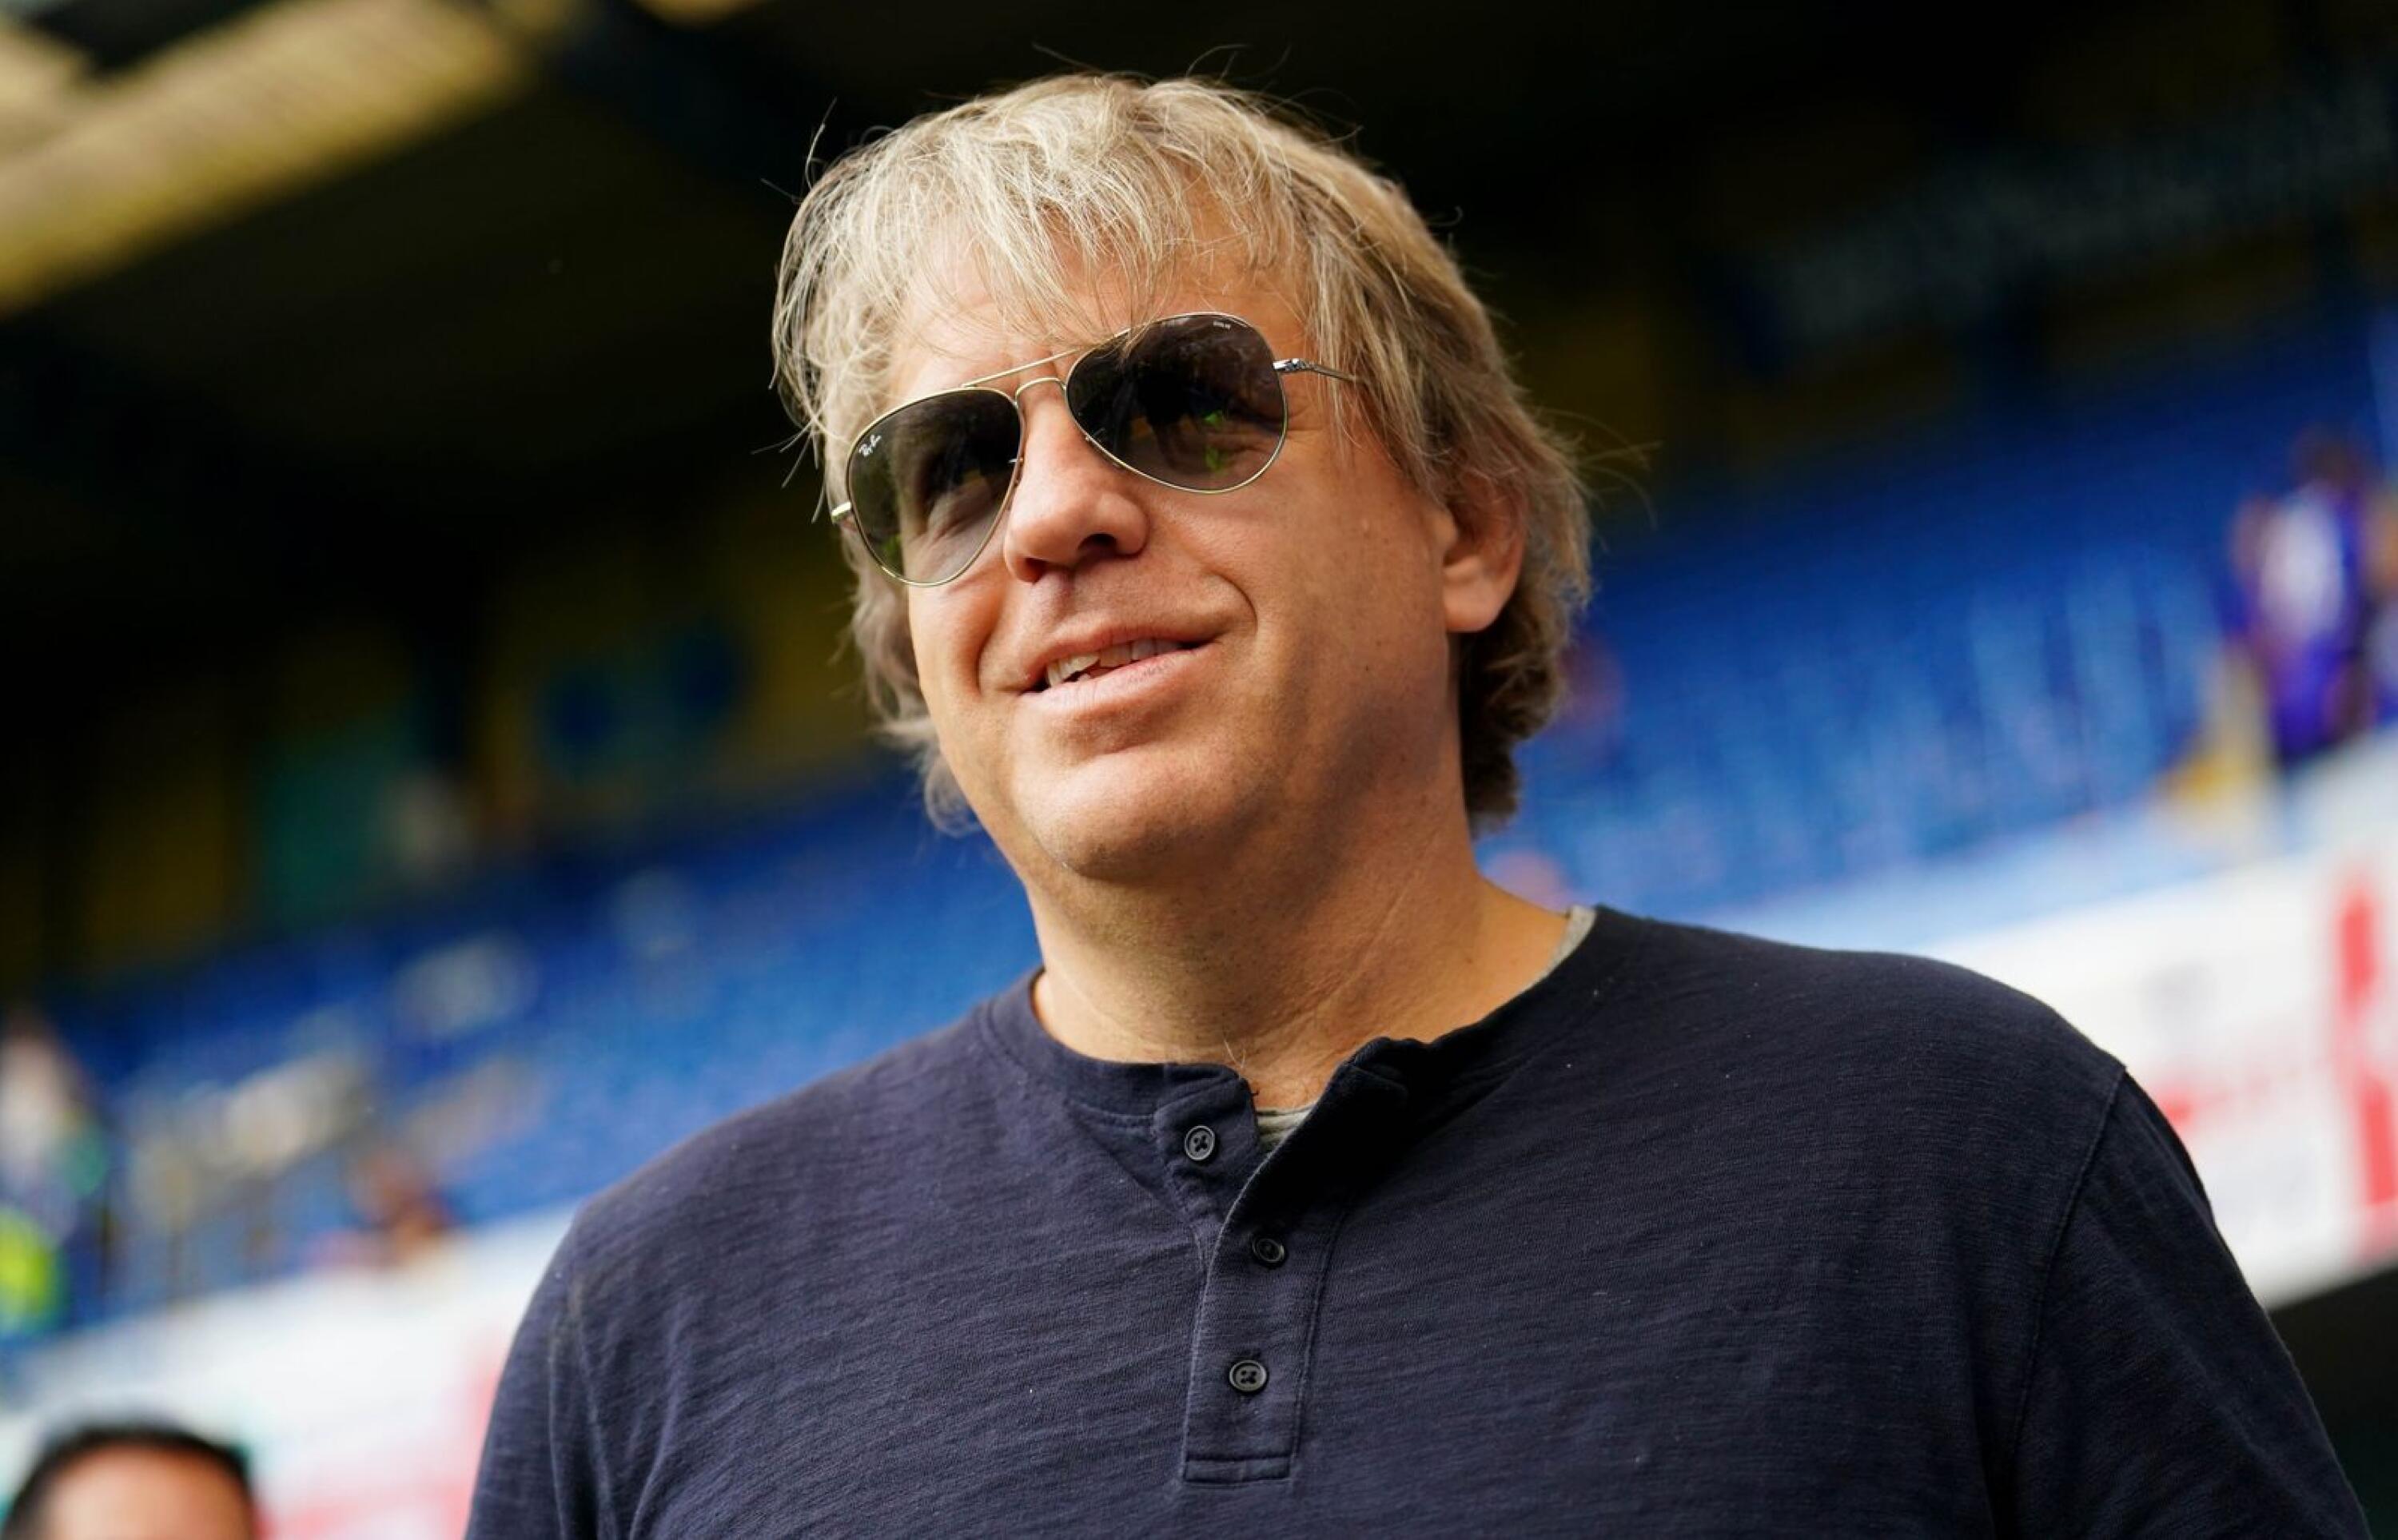 New Chelsea owner Todd Boehly on the pitch after a Premier League match at Stamford Bridge, London